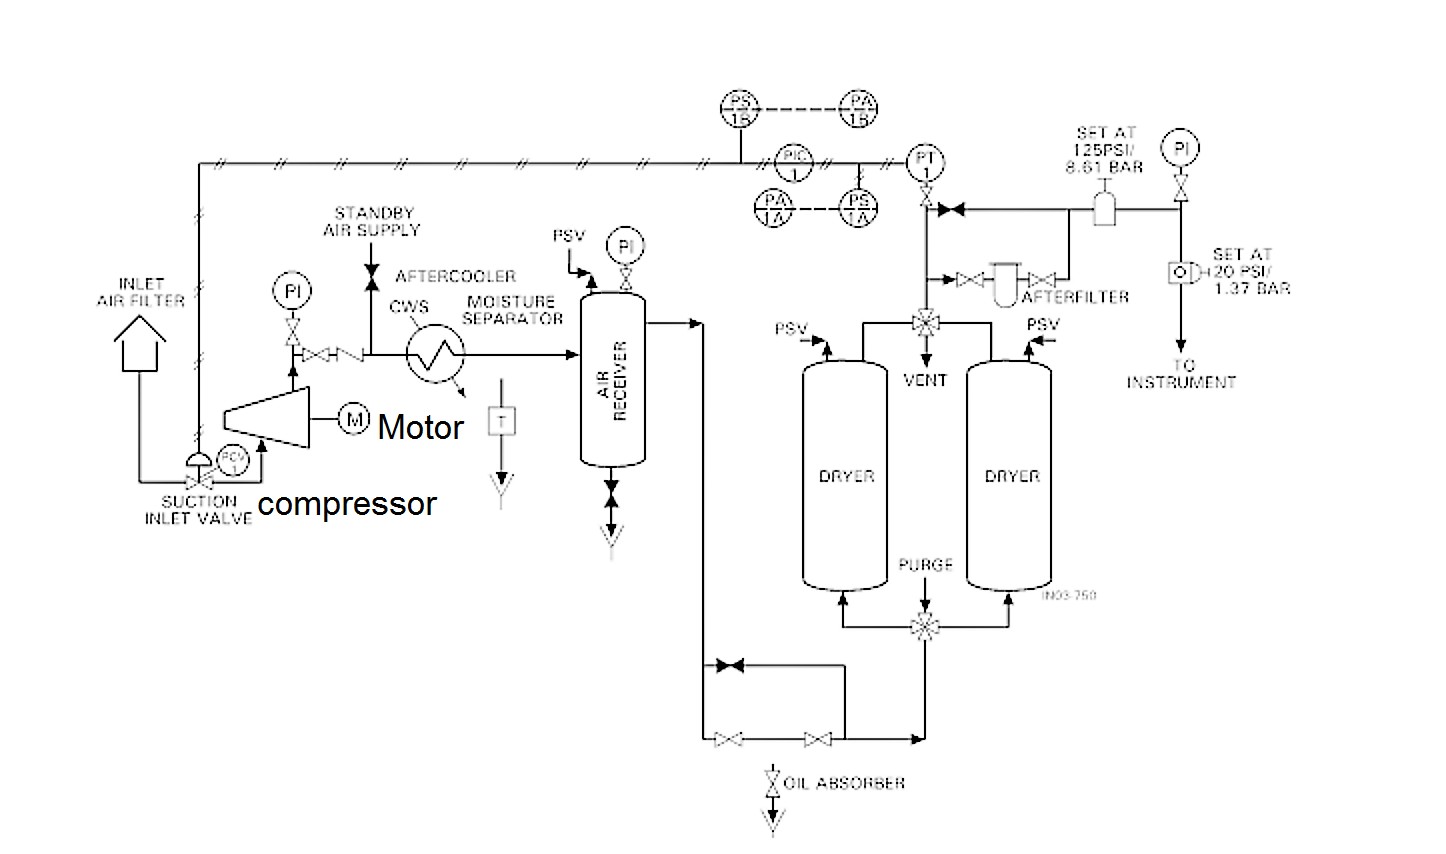 P&id Diagram For Basic Air Supply System And It s Operation Air pressor Pressure Switch Wiring Diagram Air pressor Diagram